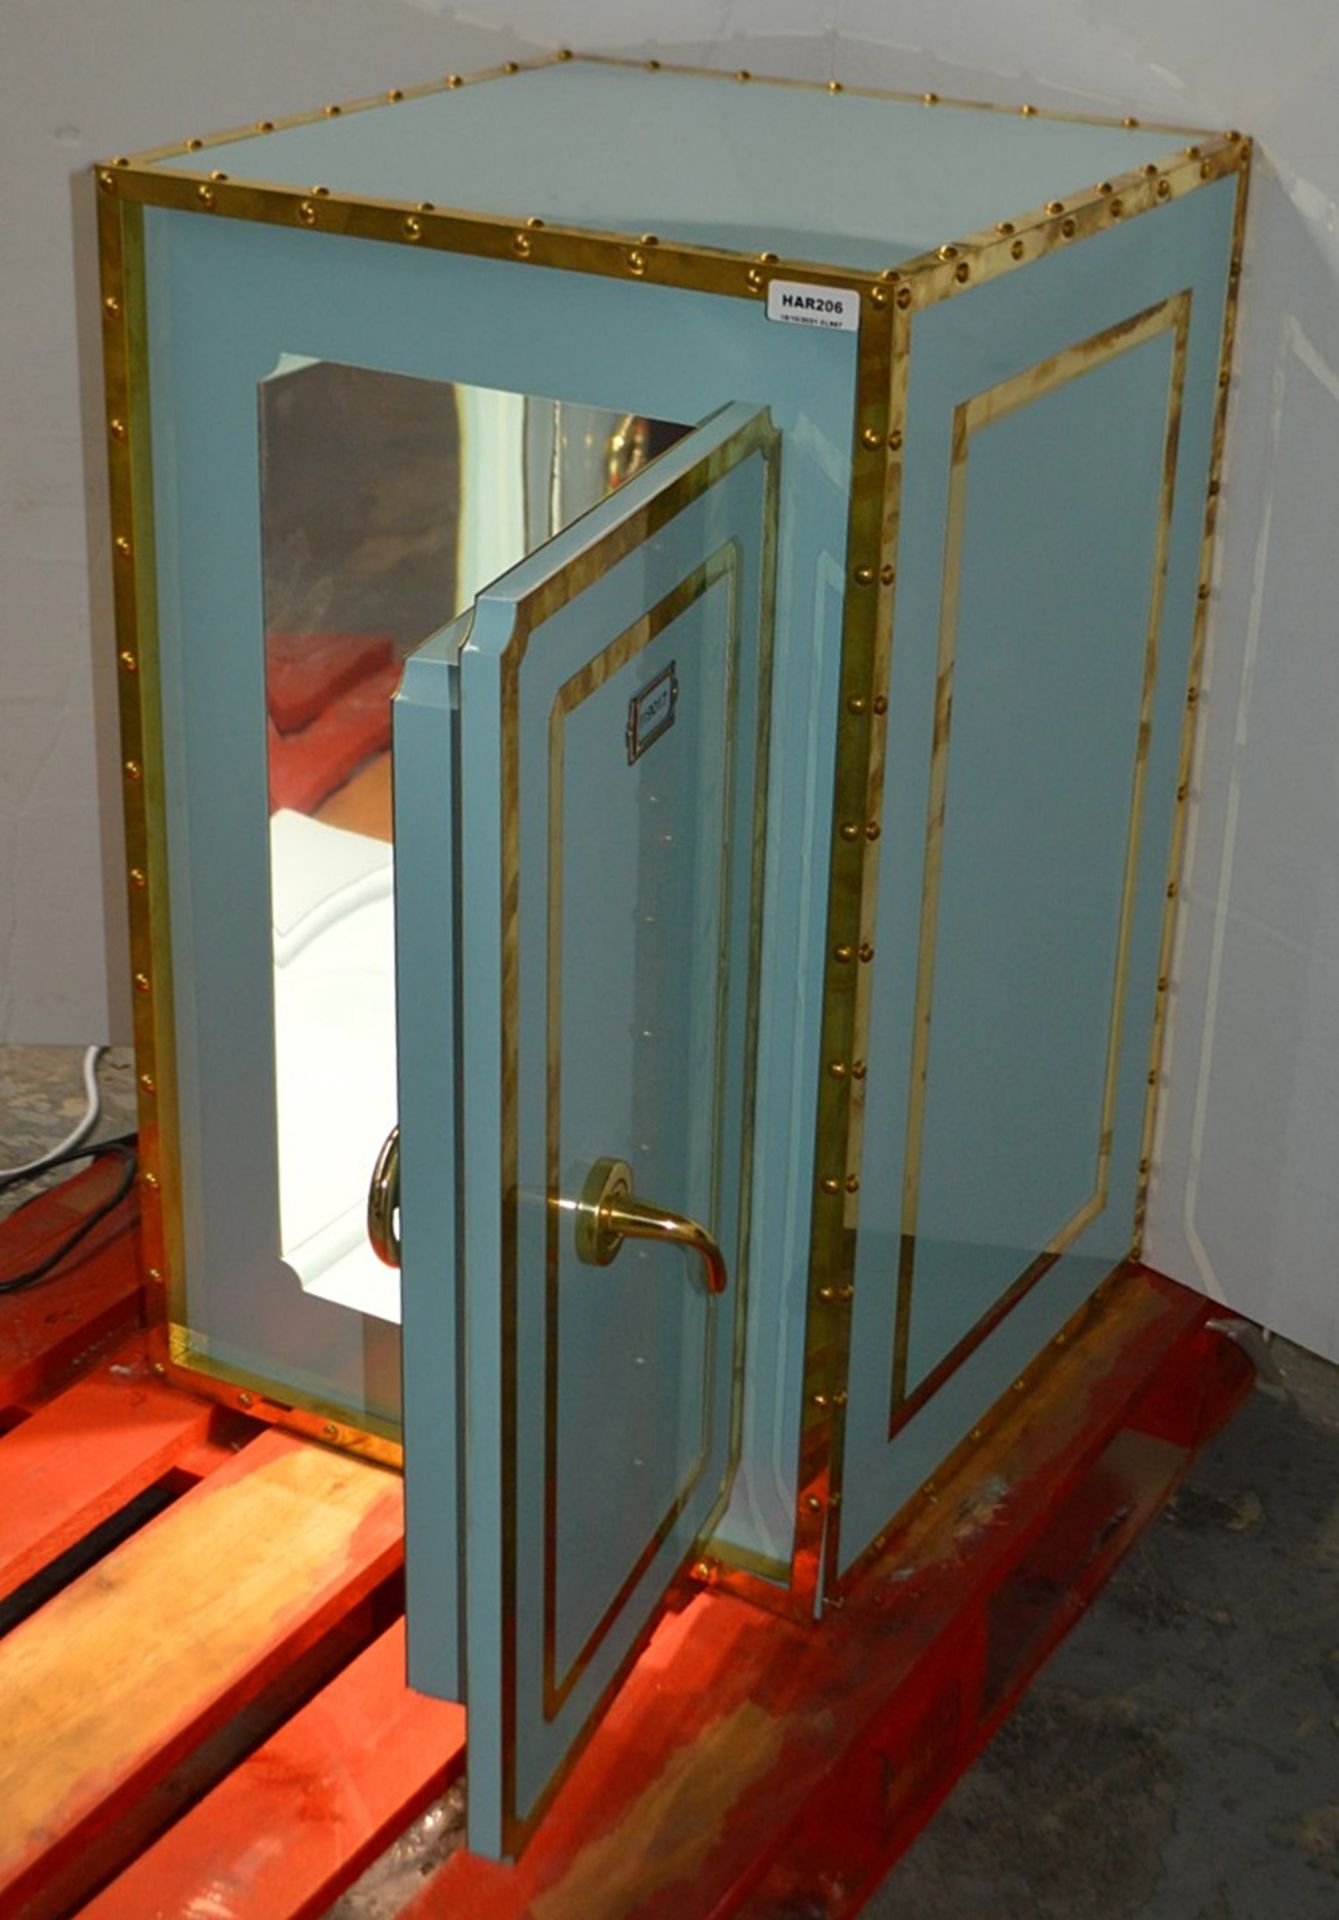 1 x Illuminated Bank Vault Safe-style Mirrored Retail Shop Display Box In Tiffany Blue - Dimensions: - Image 2 of 6